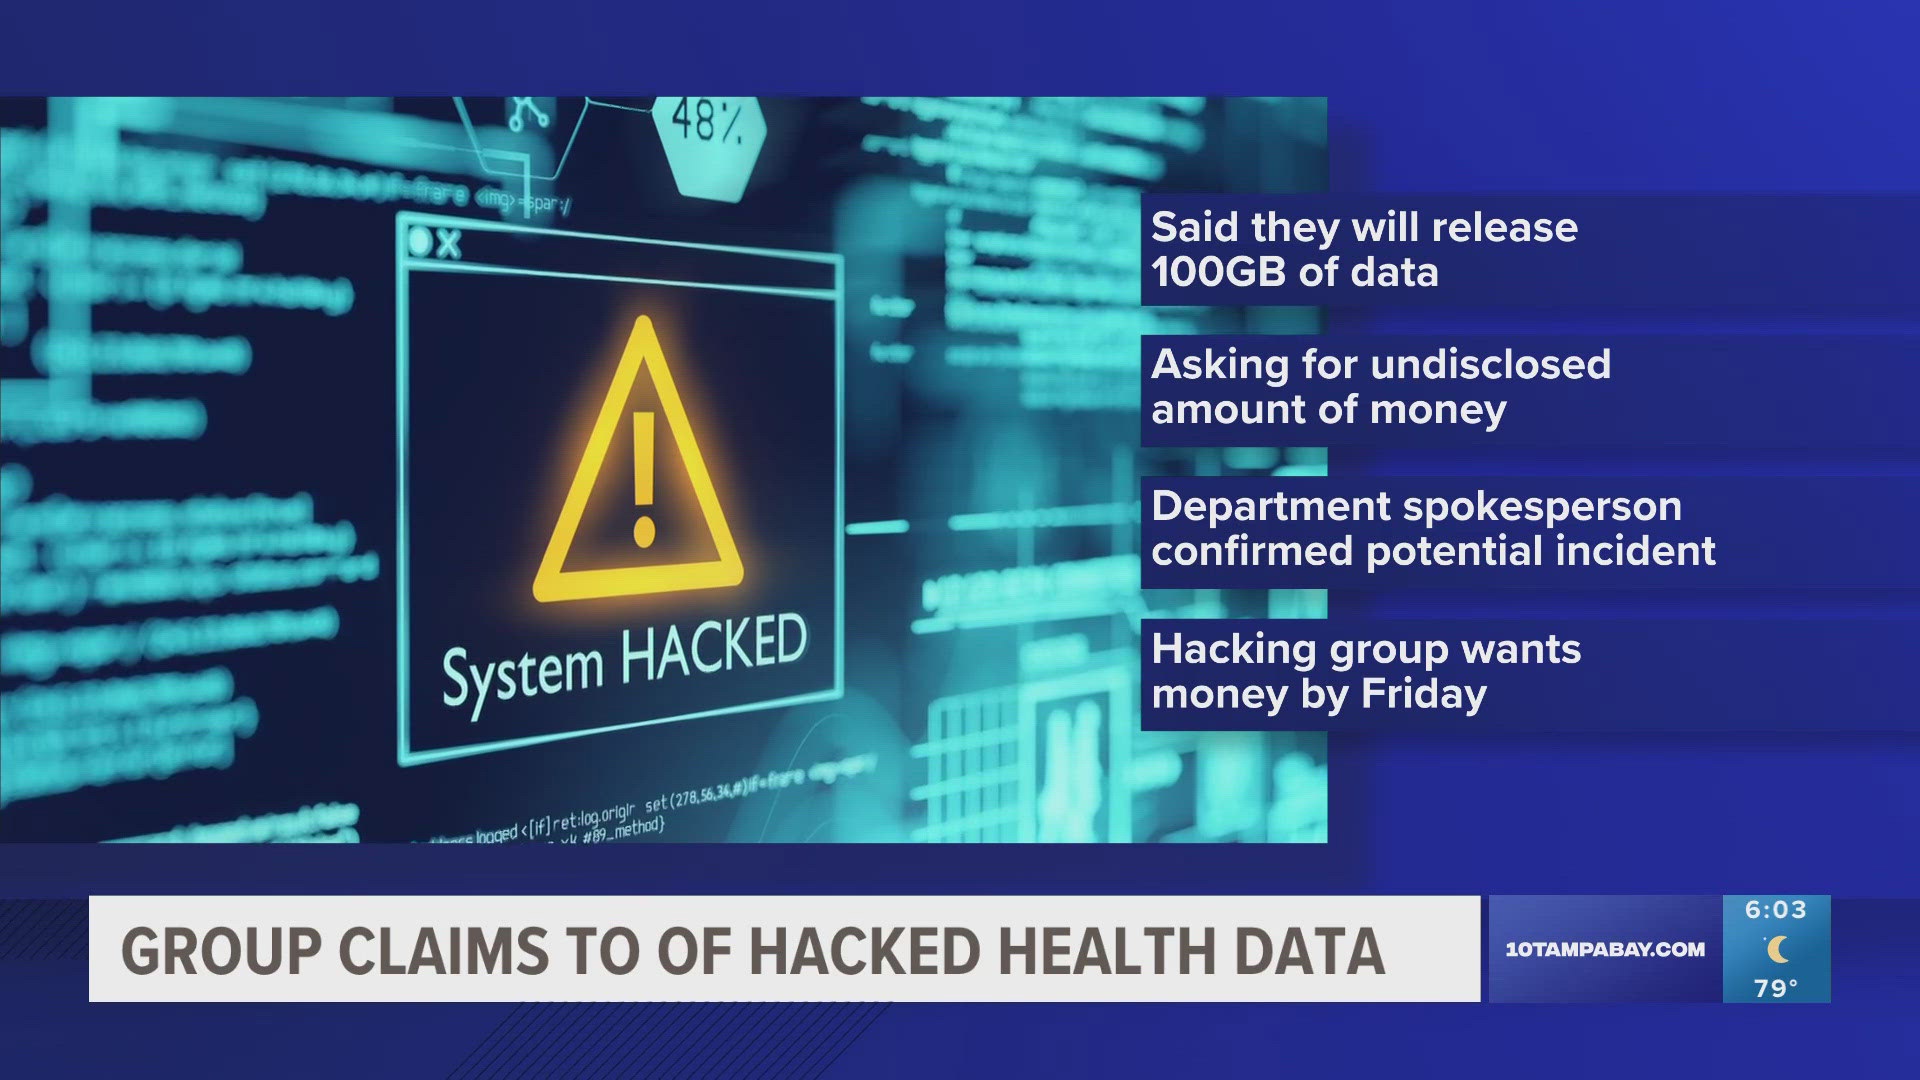 The state health department confirmed it experienced a possible cyber event.